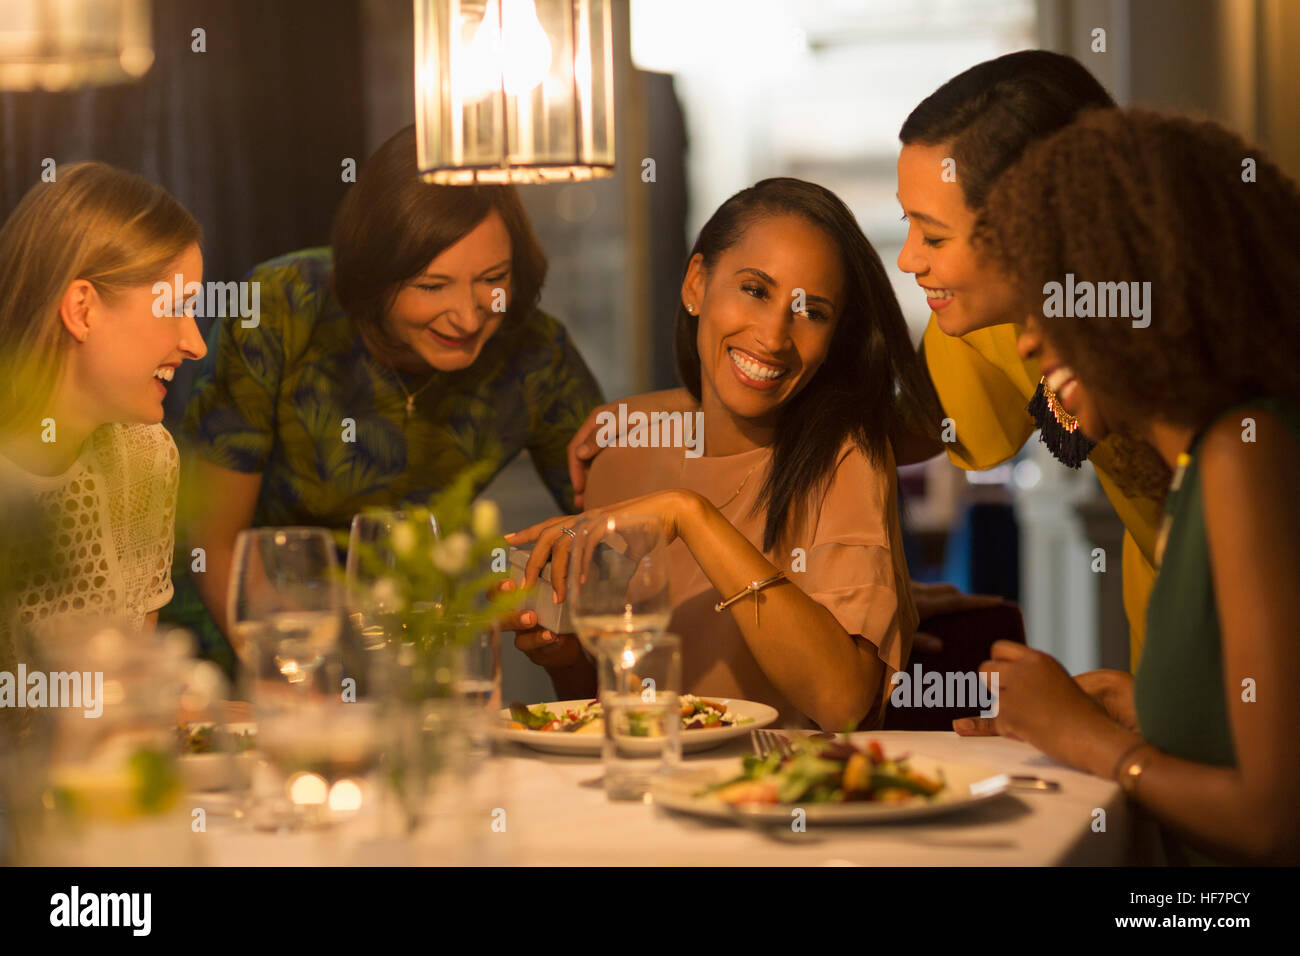 Smiling friends celebrating woman’s birthday at restaurant table Stock Photo